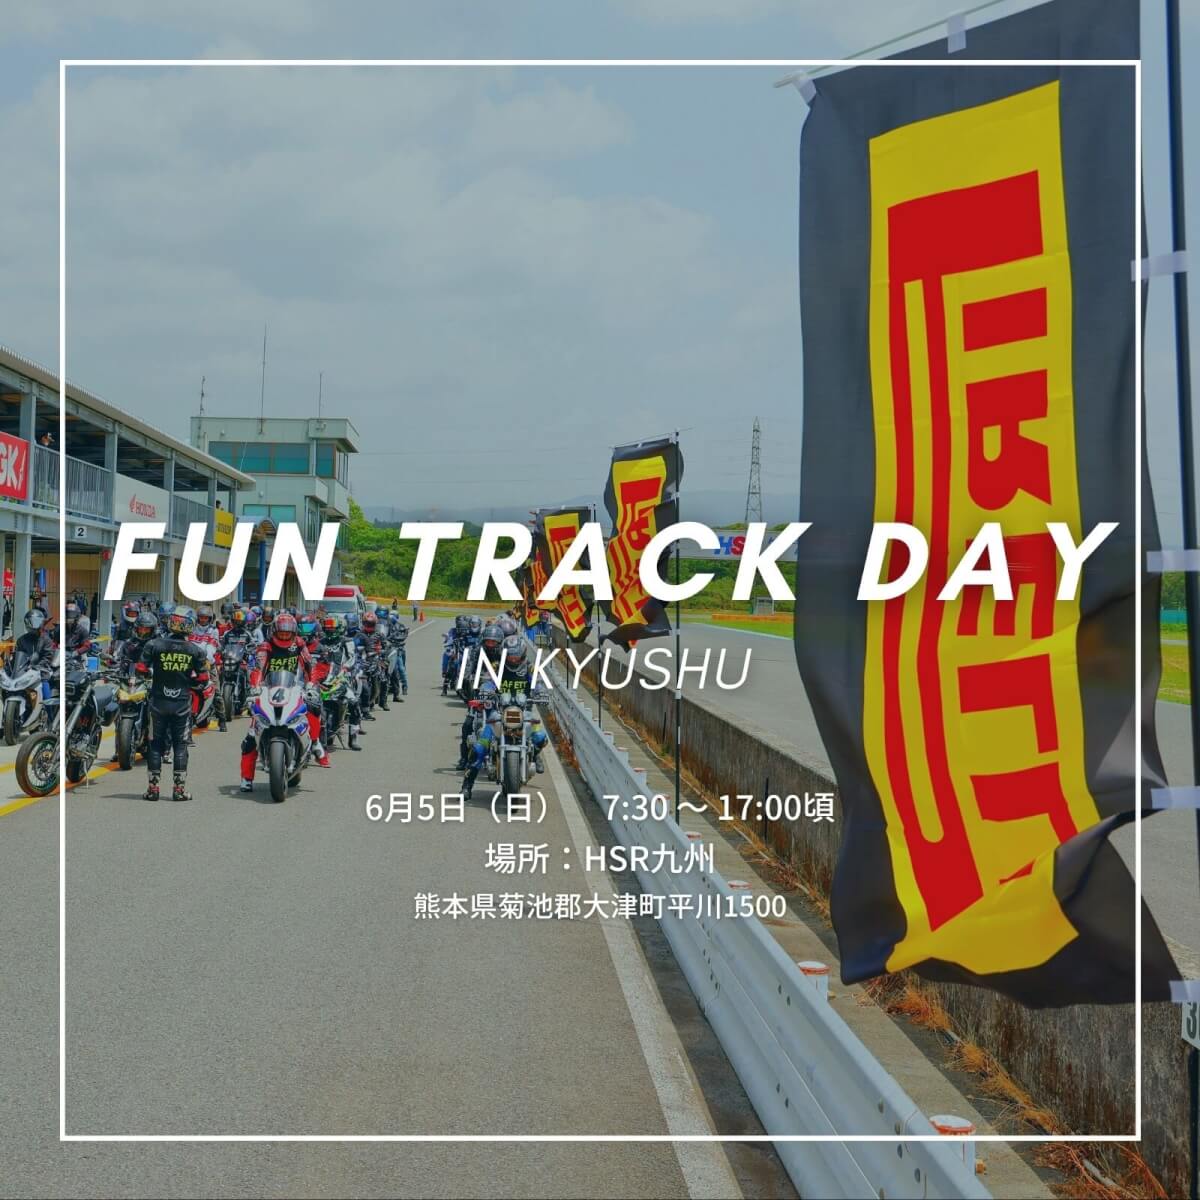 FUN TRACK DAY参加させて頂きました！！